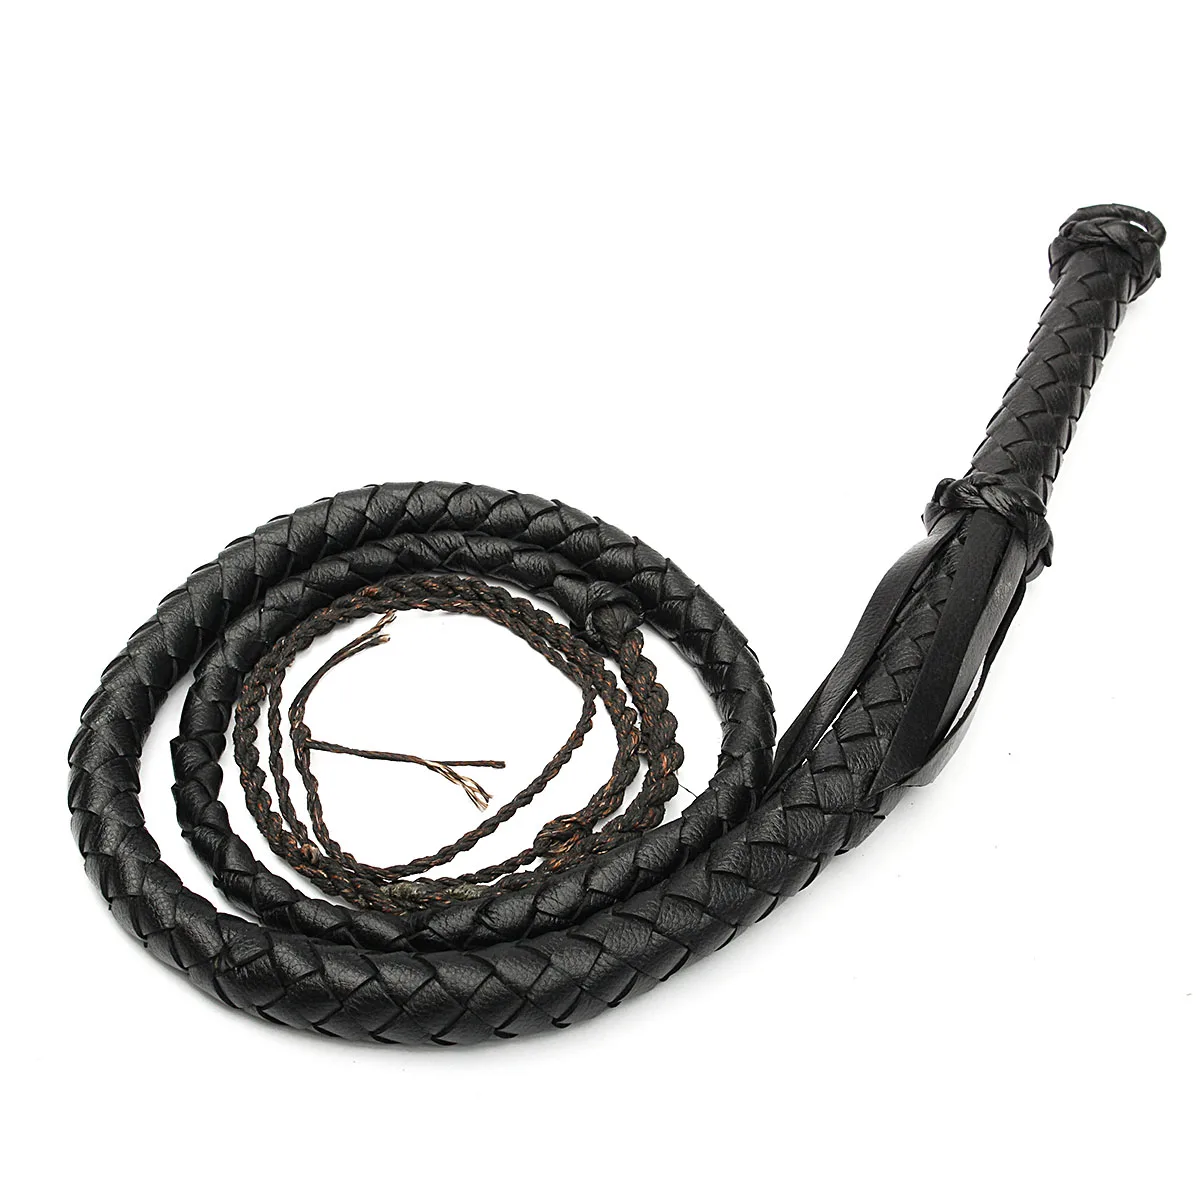 Black Artificial Leather Bullwhip Plait Riders Stock whip Cow Whip flogger 